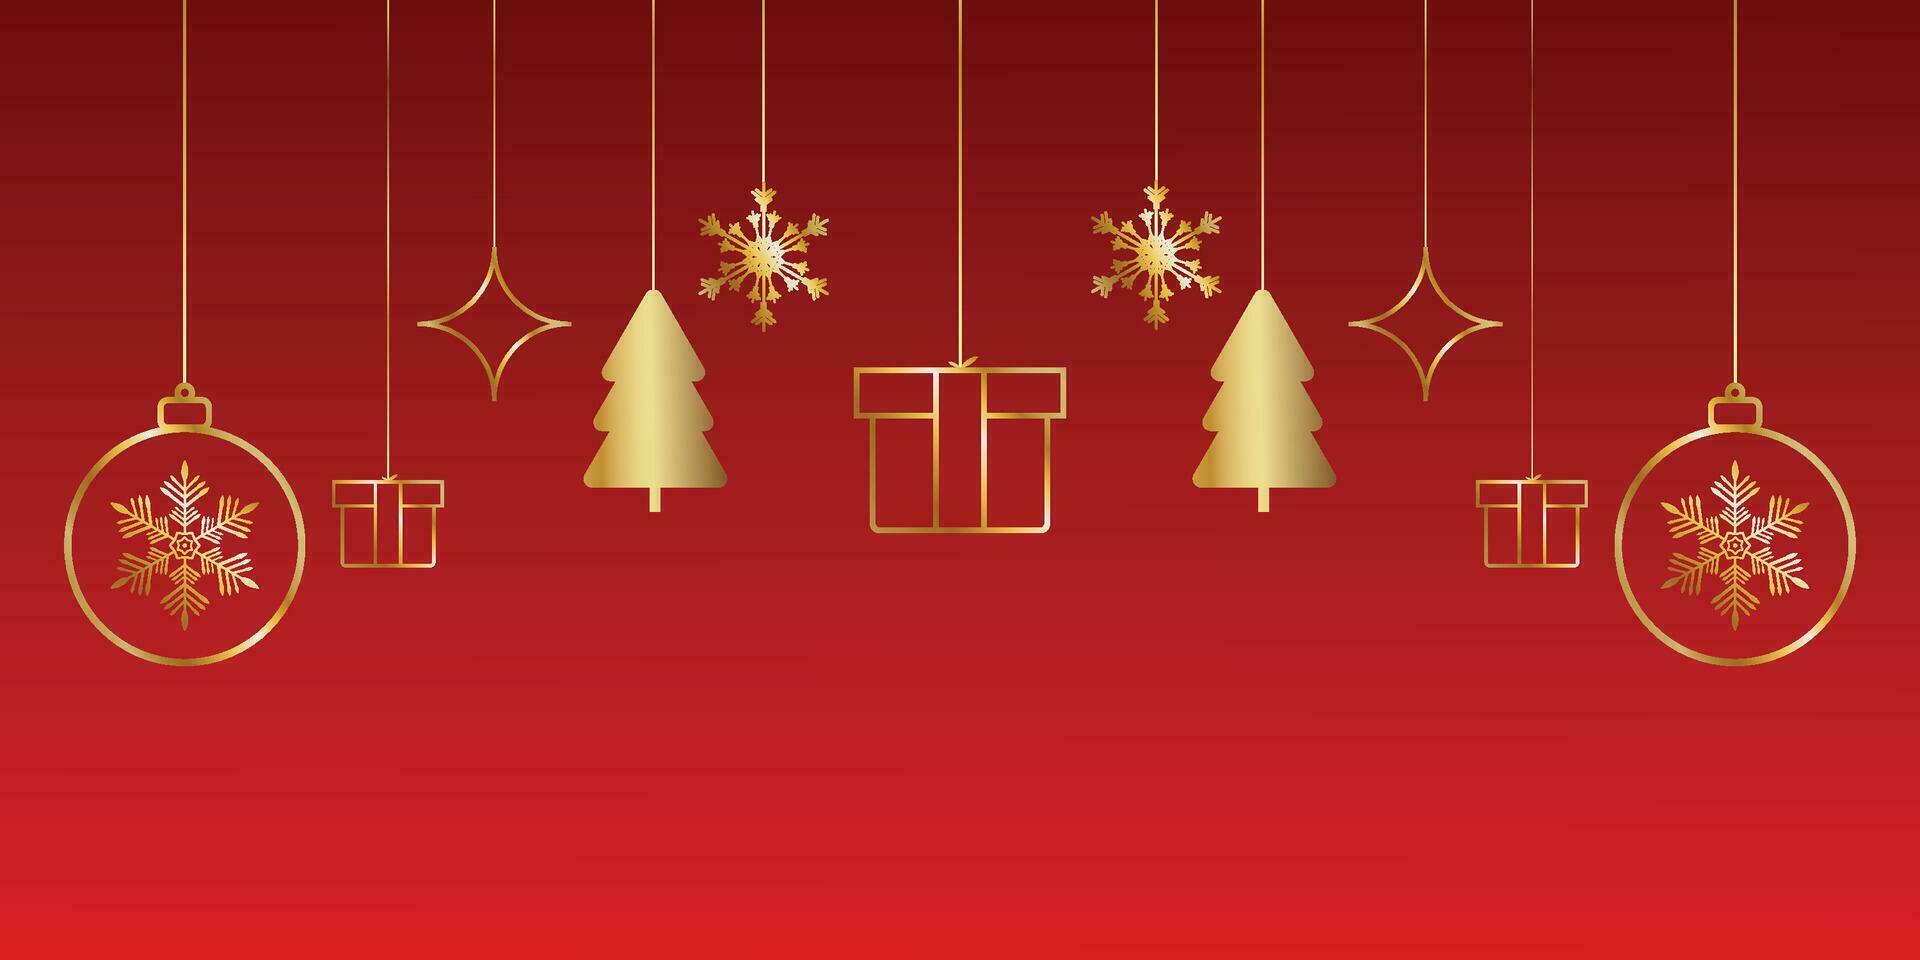 Merry Christmas red background with golden stars and tree with golden ball vector